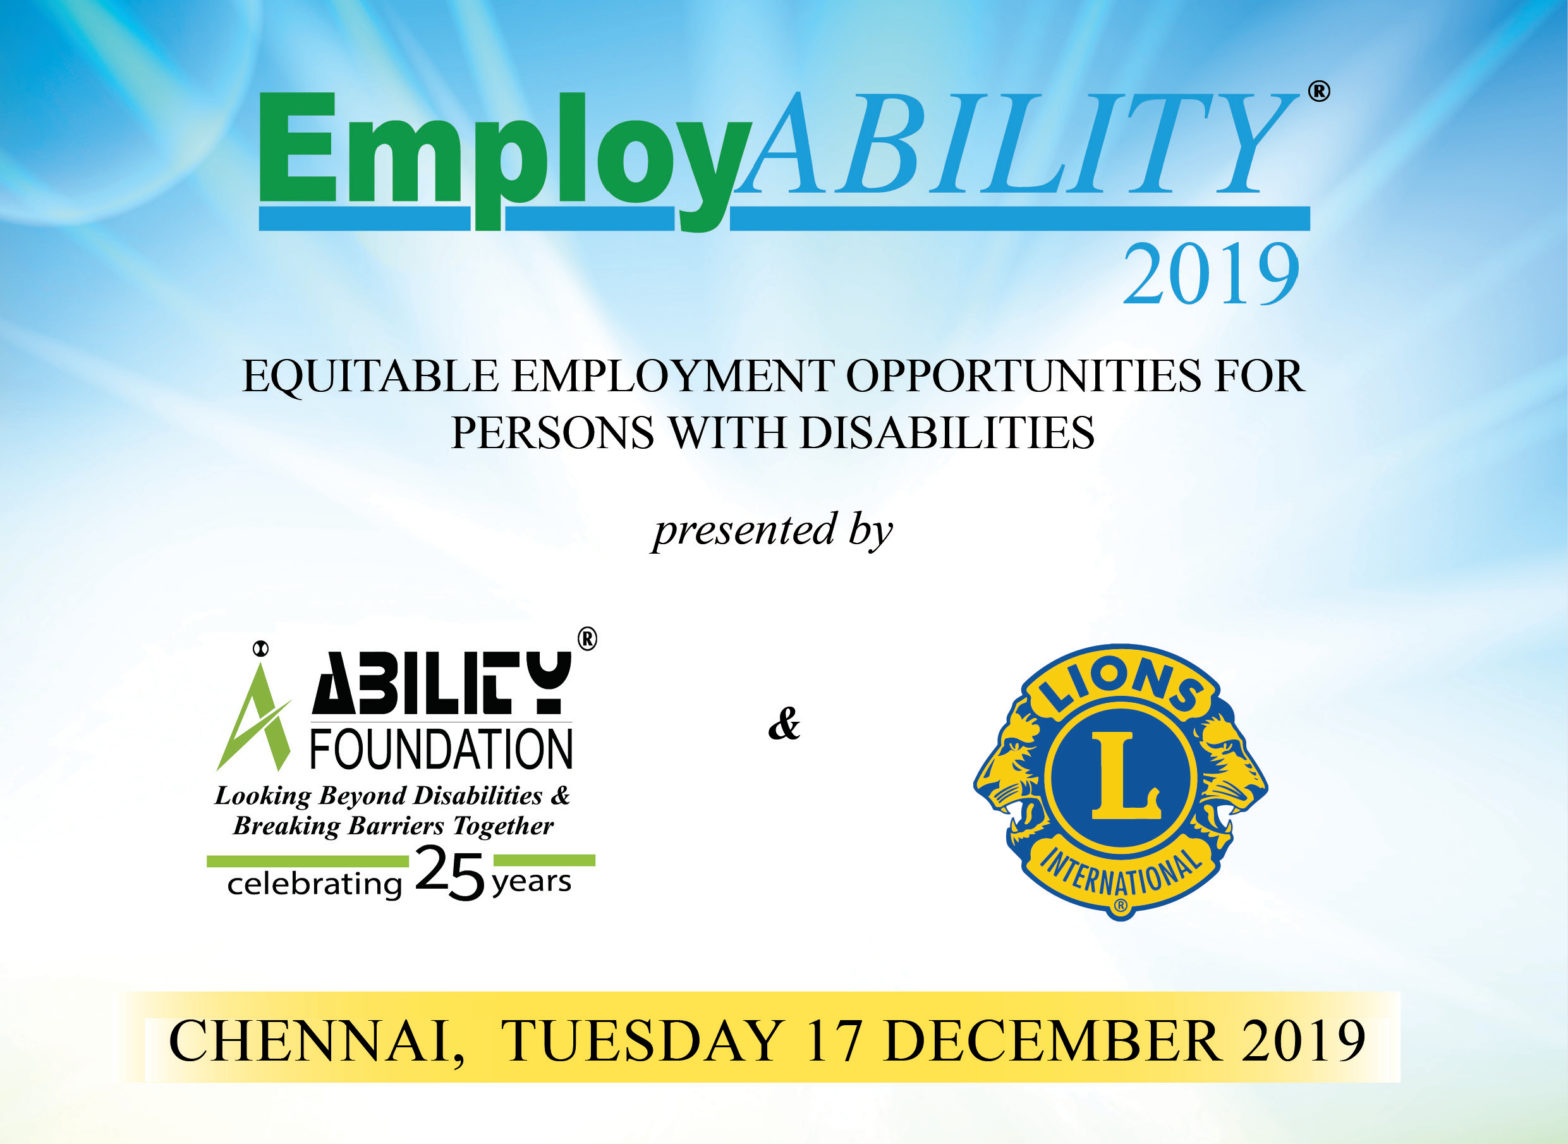 EmployAbility2019 - Job fair for Persons with Disabilities